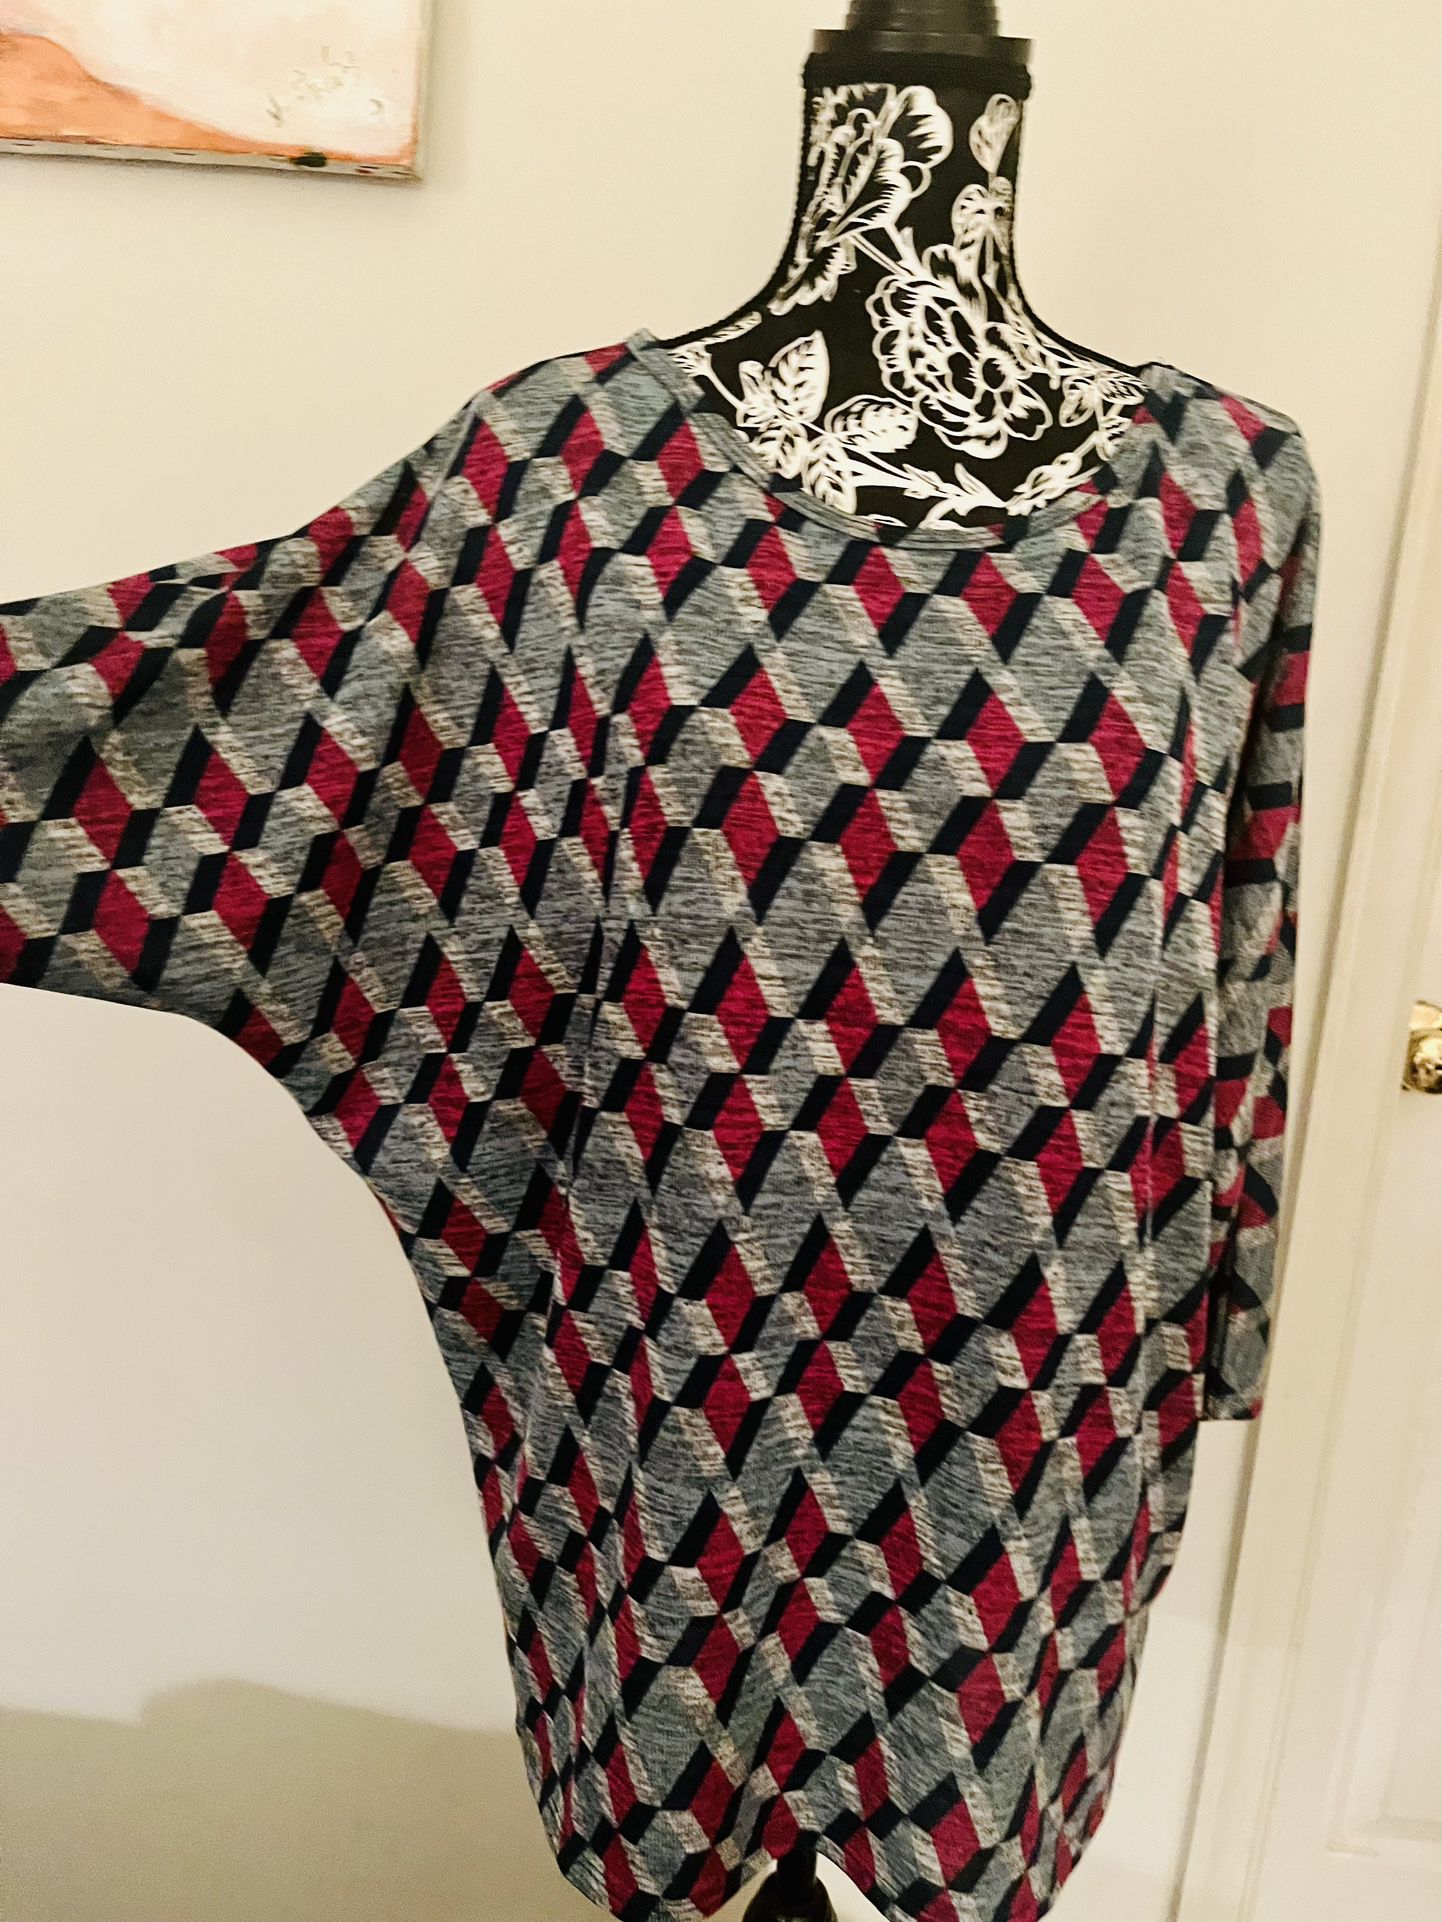 1X tunic top for woman. 3/4 sleeve. New with tags. Very soft 97%polyester 3% spandex. Comes from a smoke free environment.  